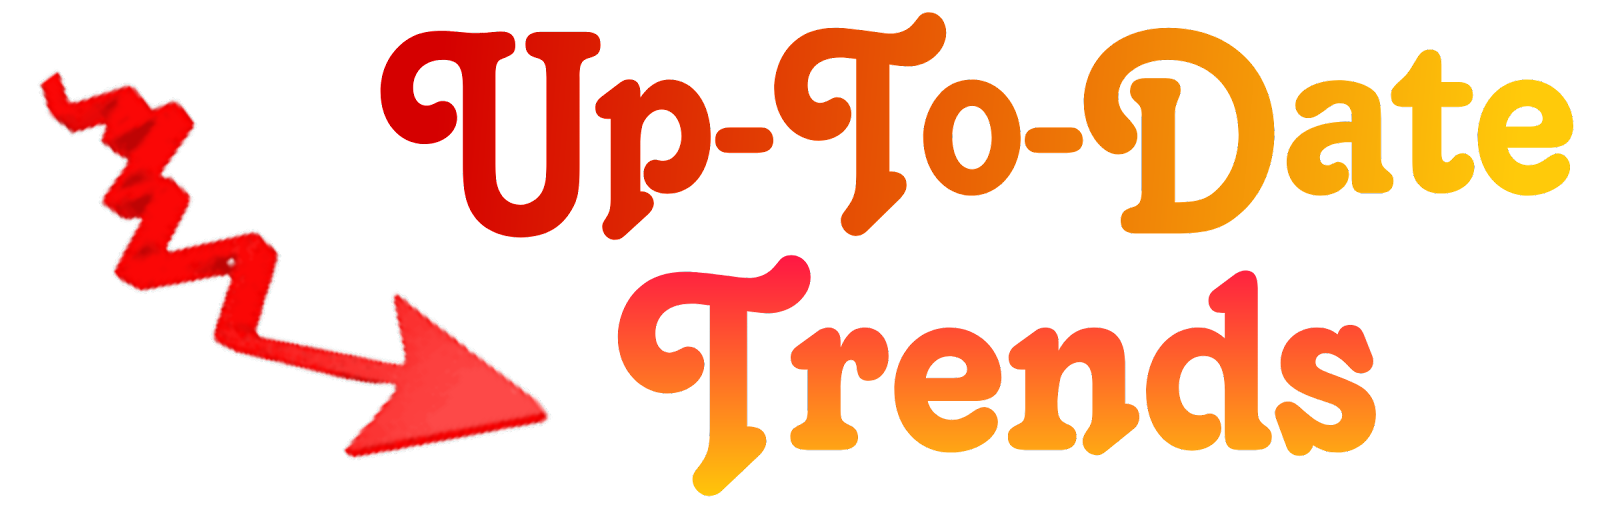 Up-to-date Trends